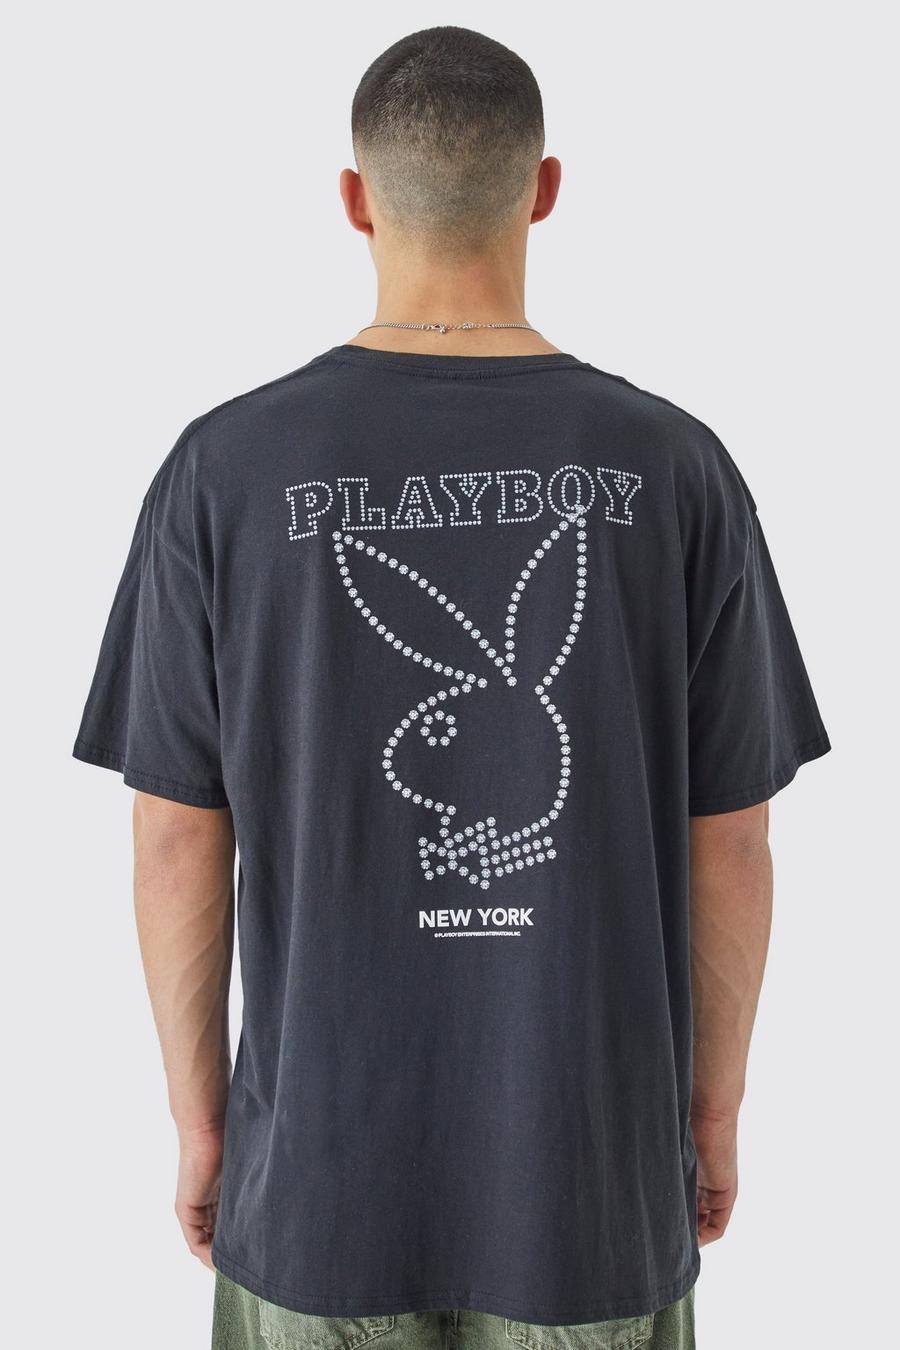 T-shirt oversize ufficiale di Playboy con strass, Black image number 1